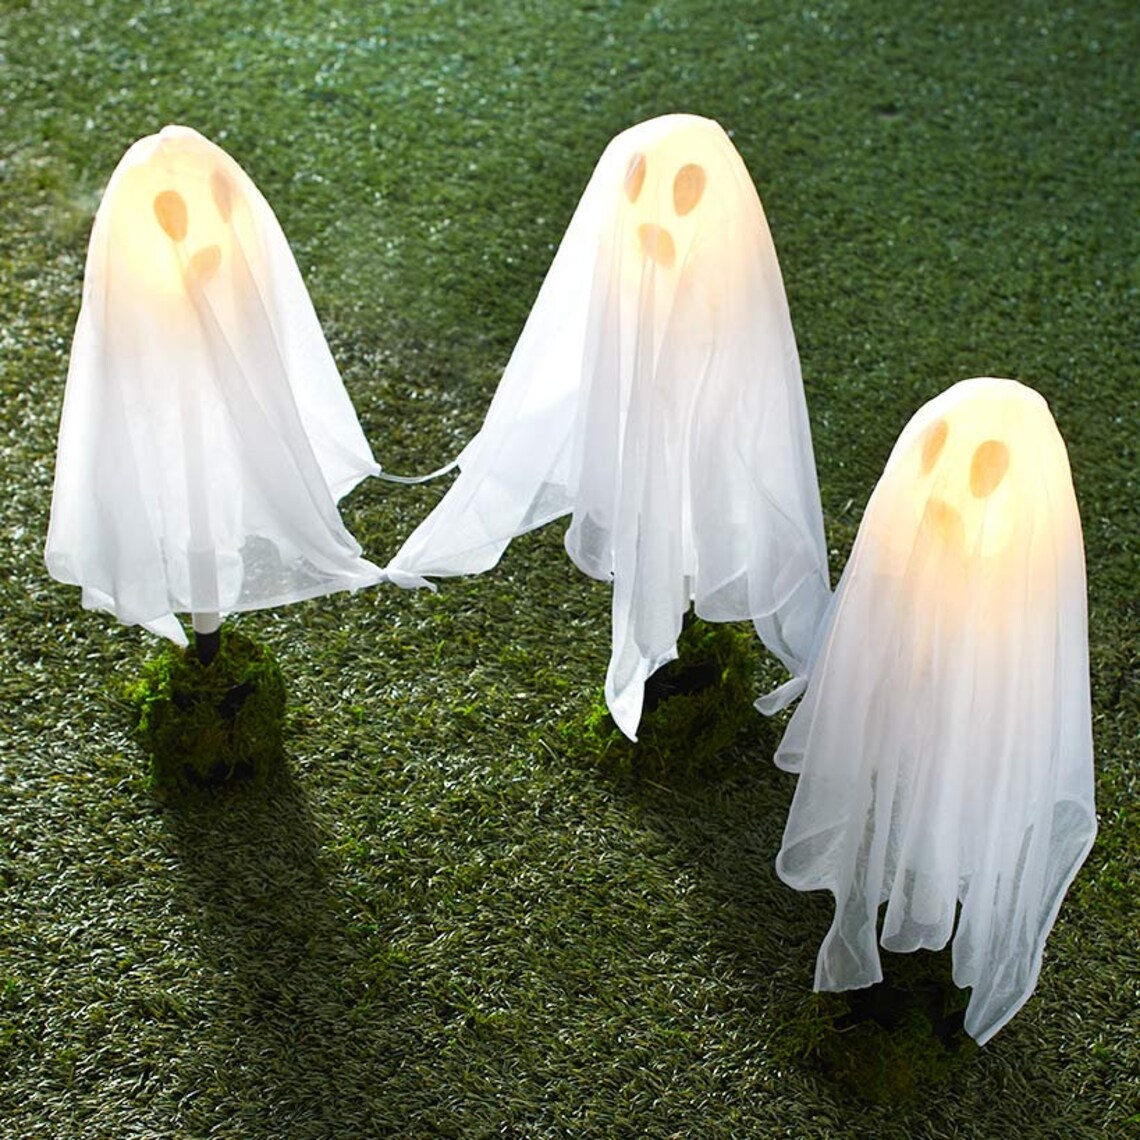 Lighted Yard Ghosts Halloween Led Light Ghost Stake | Etsy